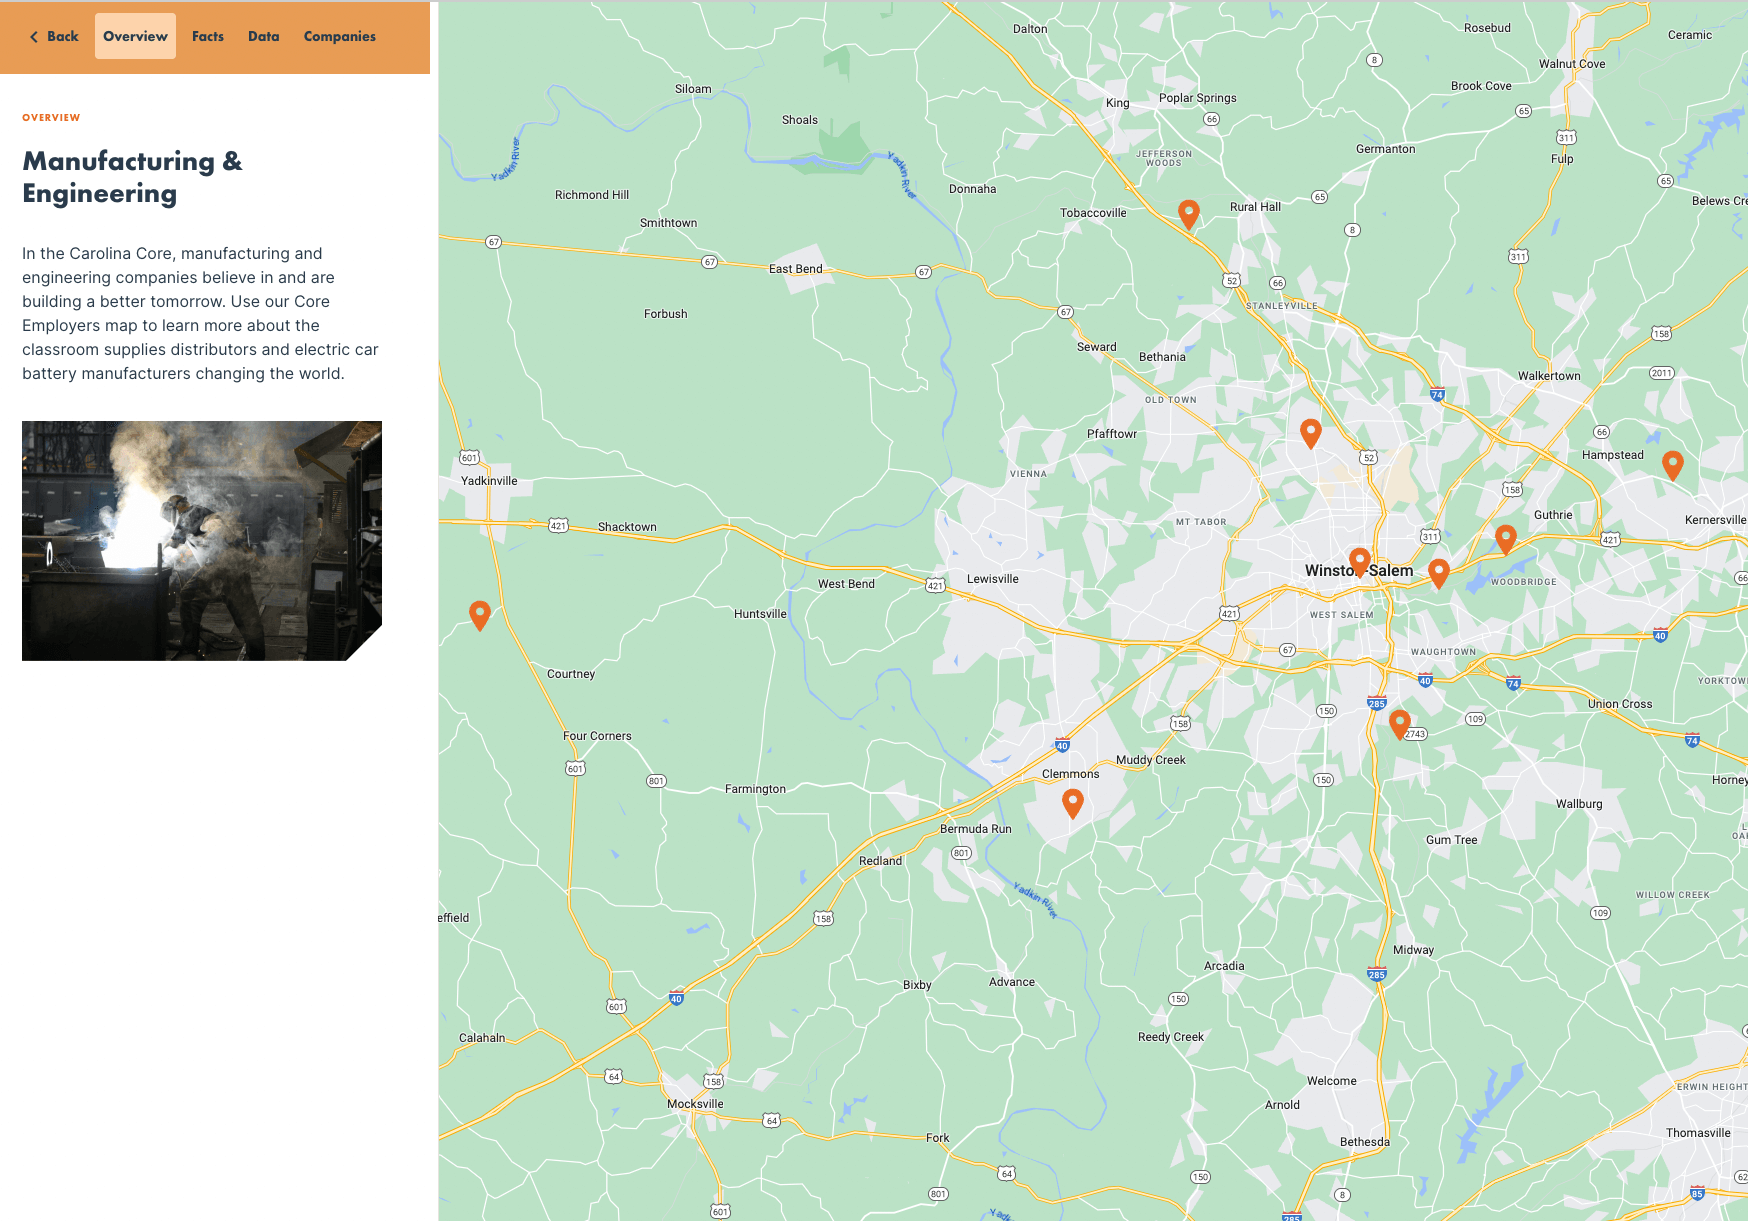 Screenshot of DCI's company cluster map